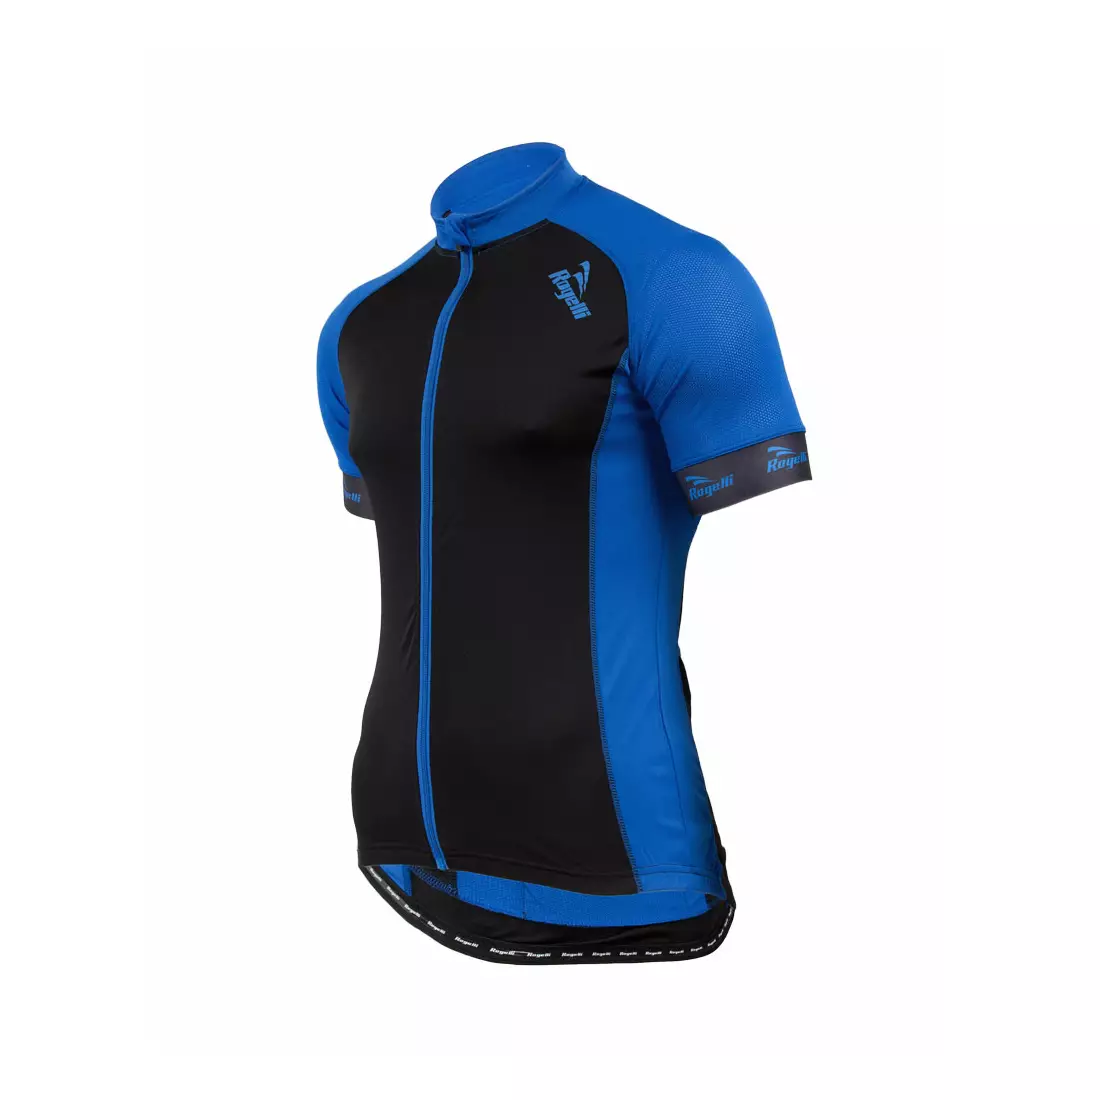 ROGELLI PRALI - men's cycling jersey, color: black and blue